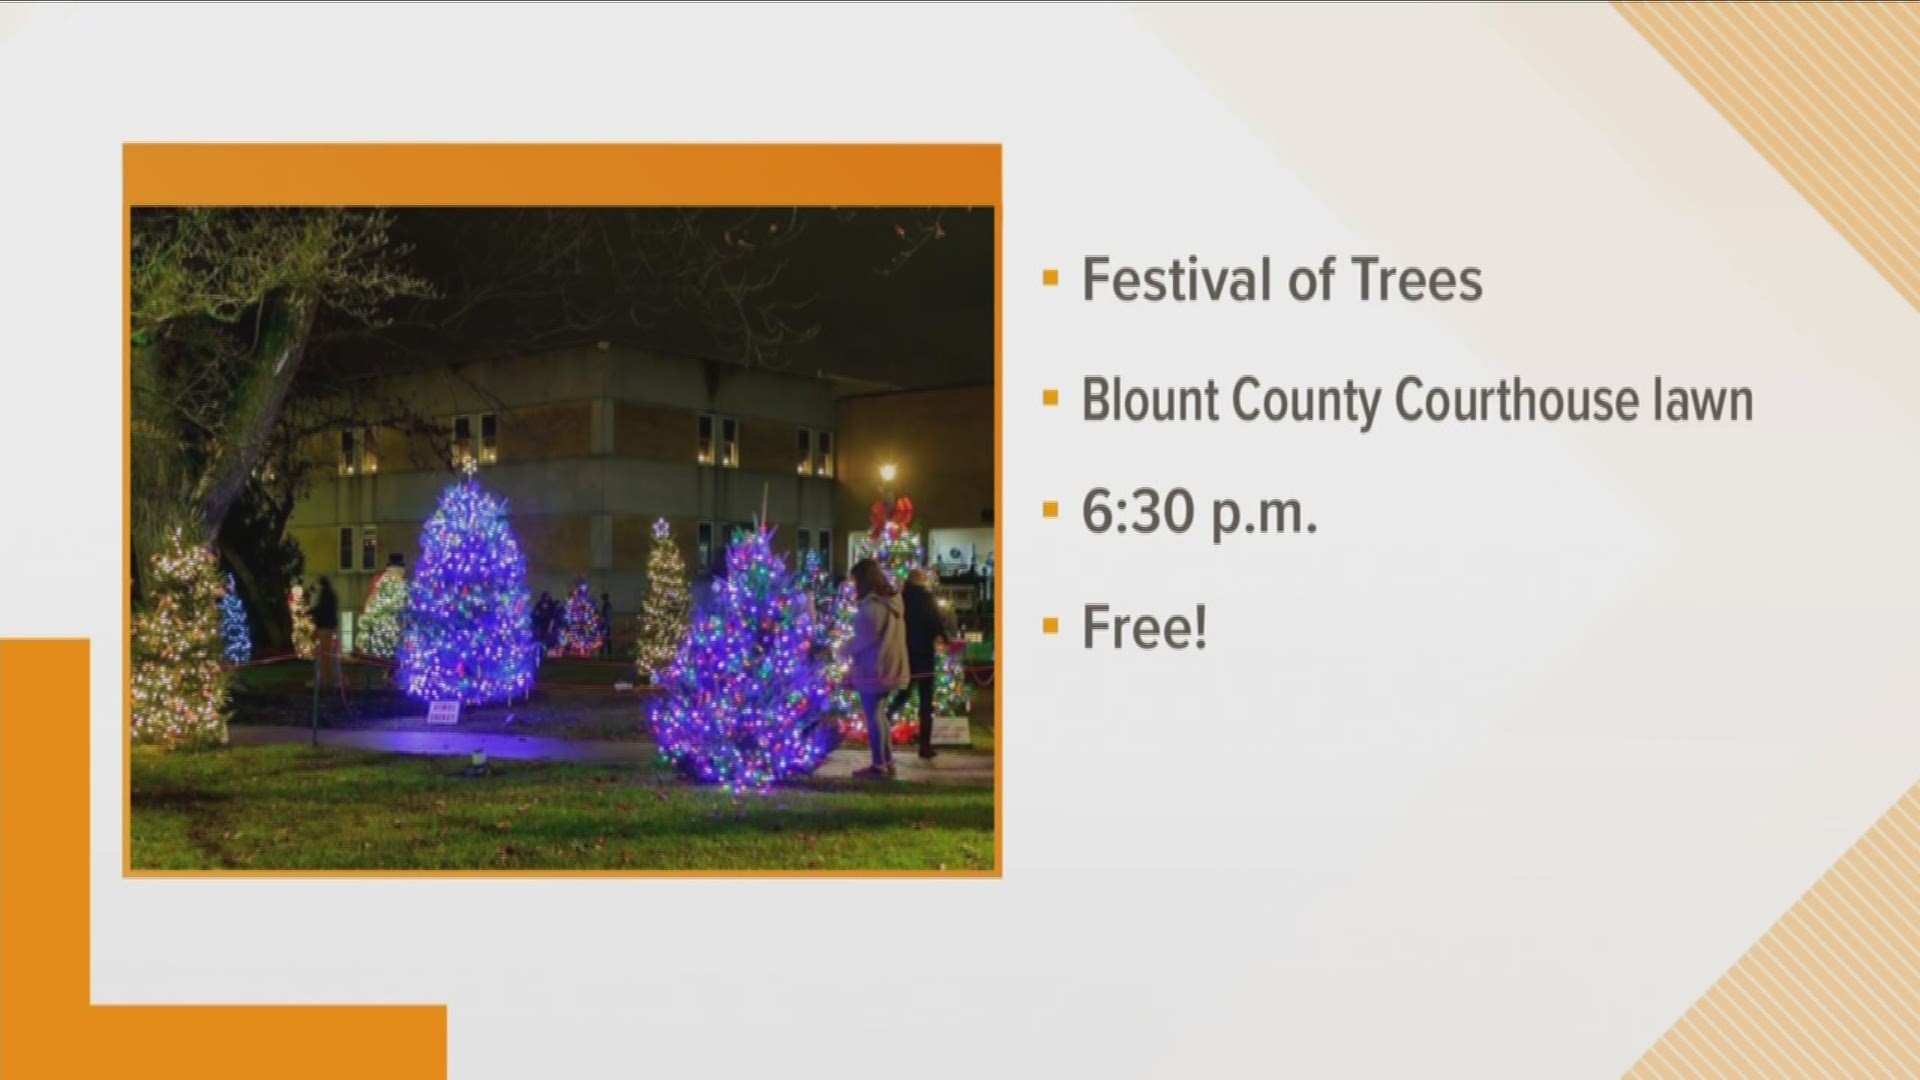 The event will display Christmas trees of several colors and sizes on the Blount County Courthouse lawn.